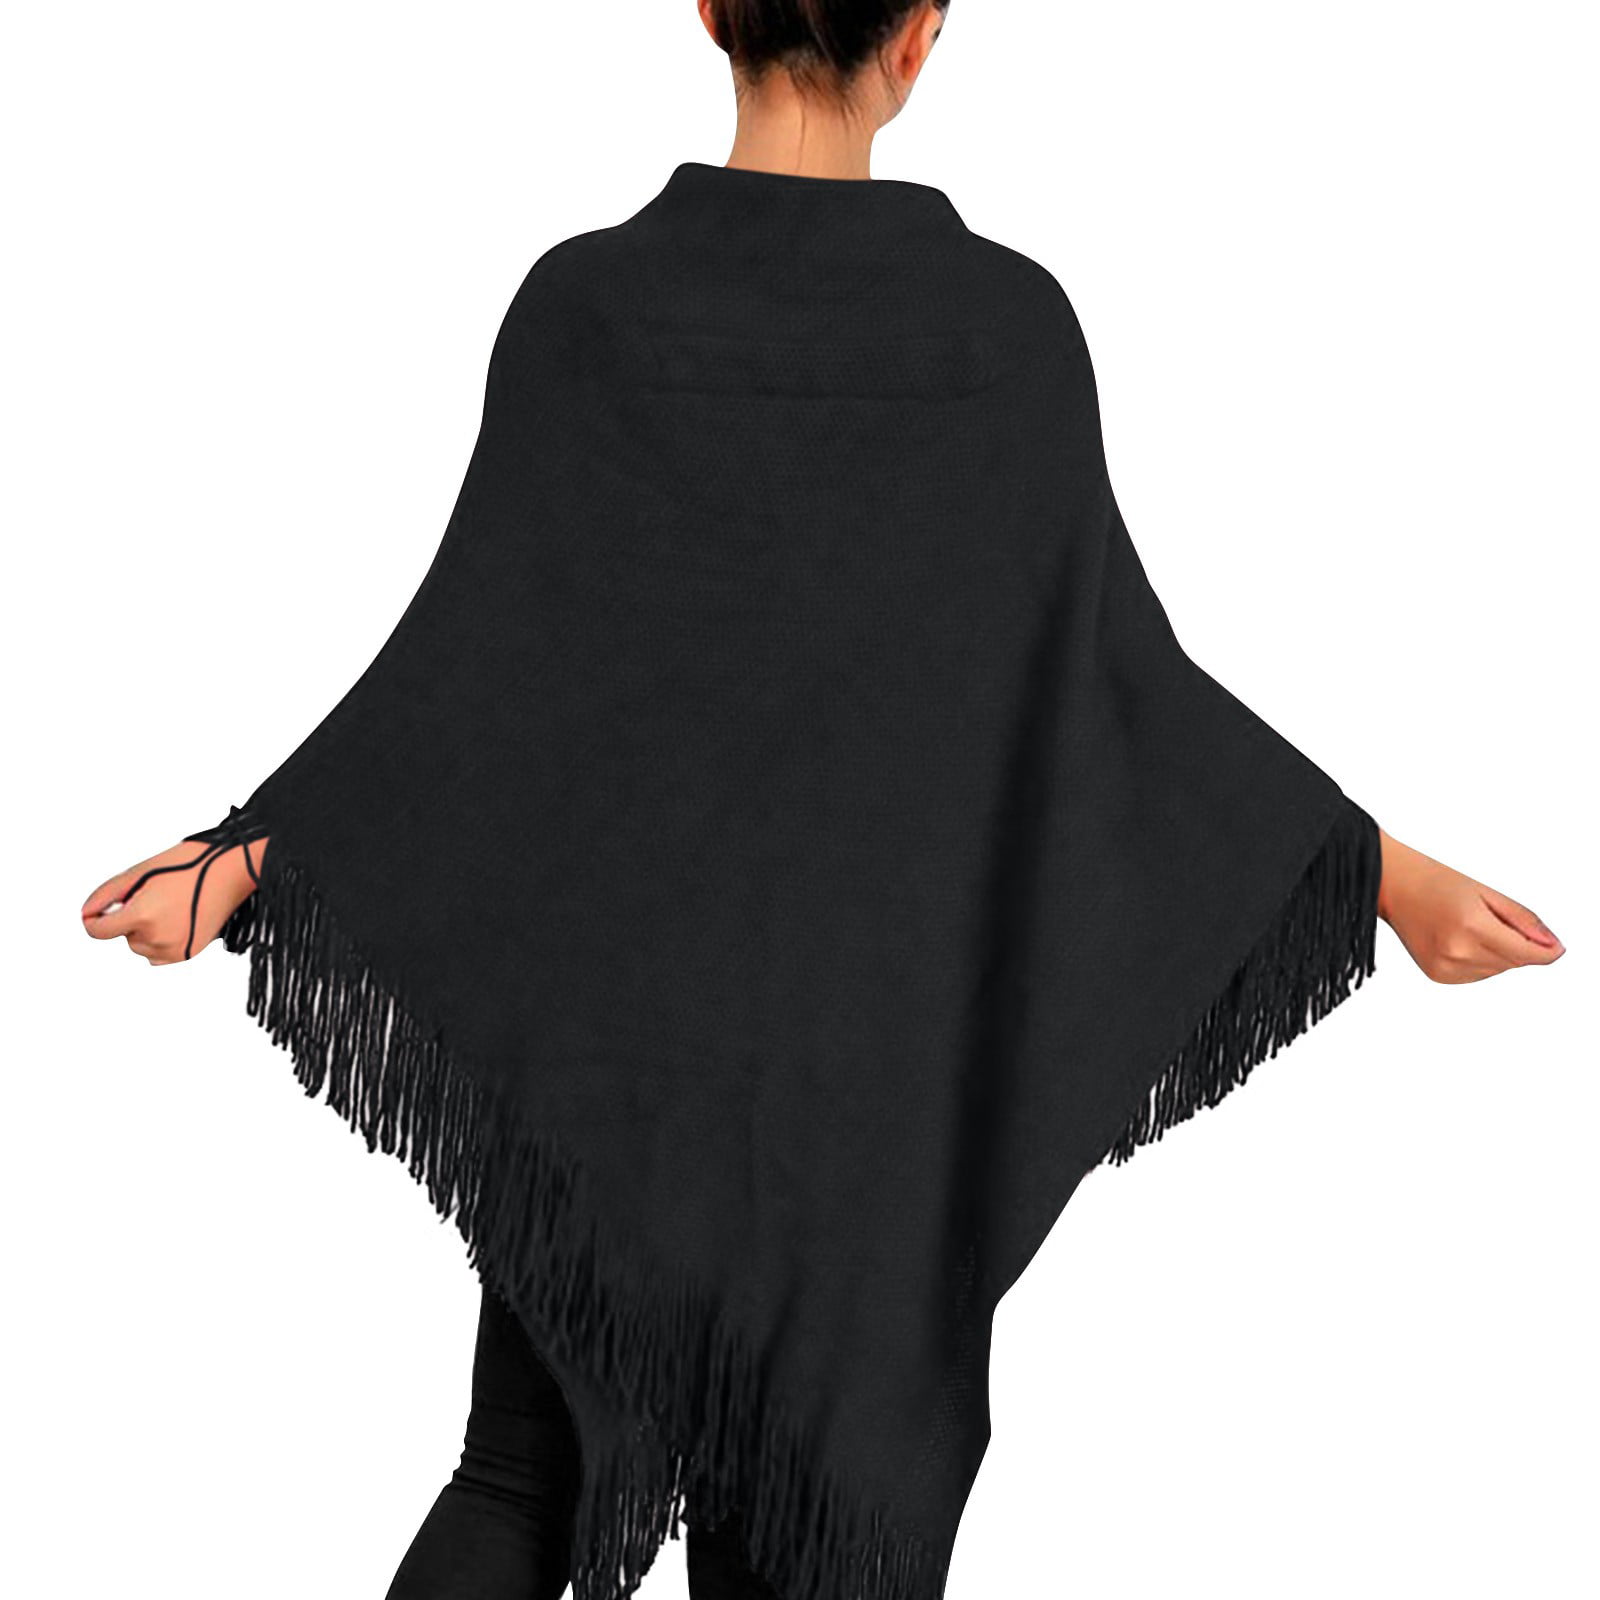 QWERTYU Women's Elegant Tassle Cape Knitted Button Up Poncho